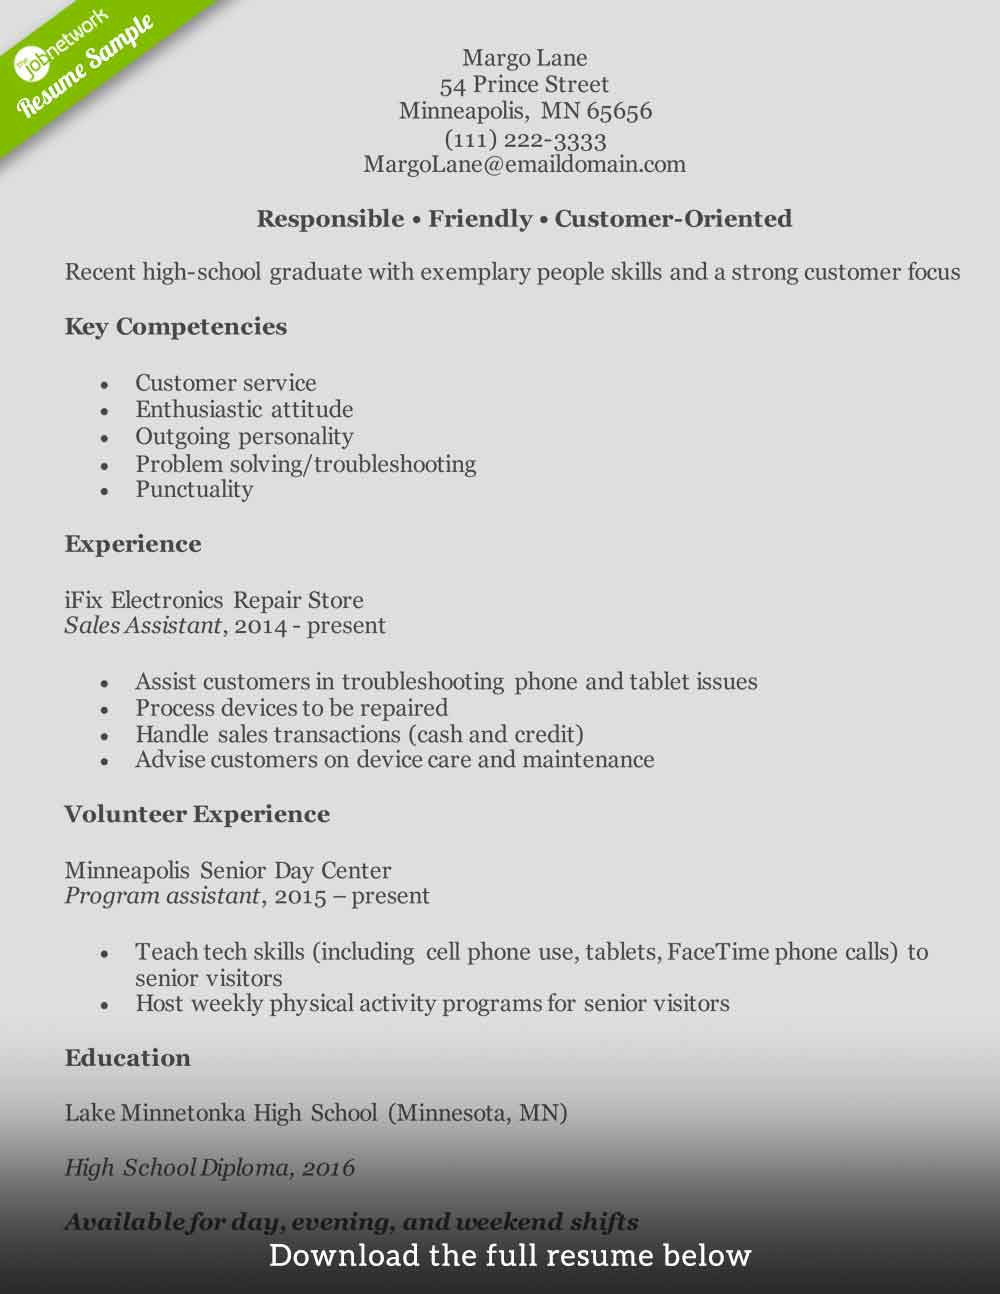 Resume Samples for Entry Level Customer Service Customer Service Resume -how to Write the Perfect One (examples)